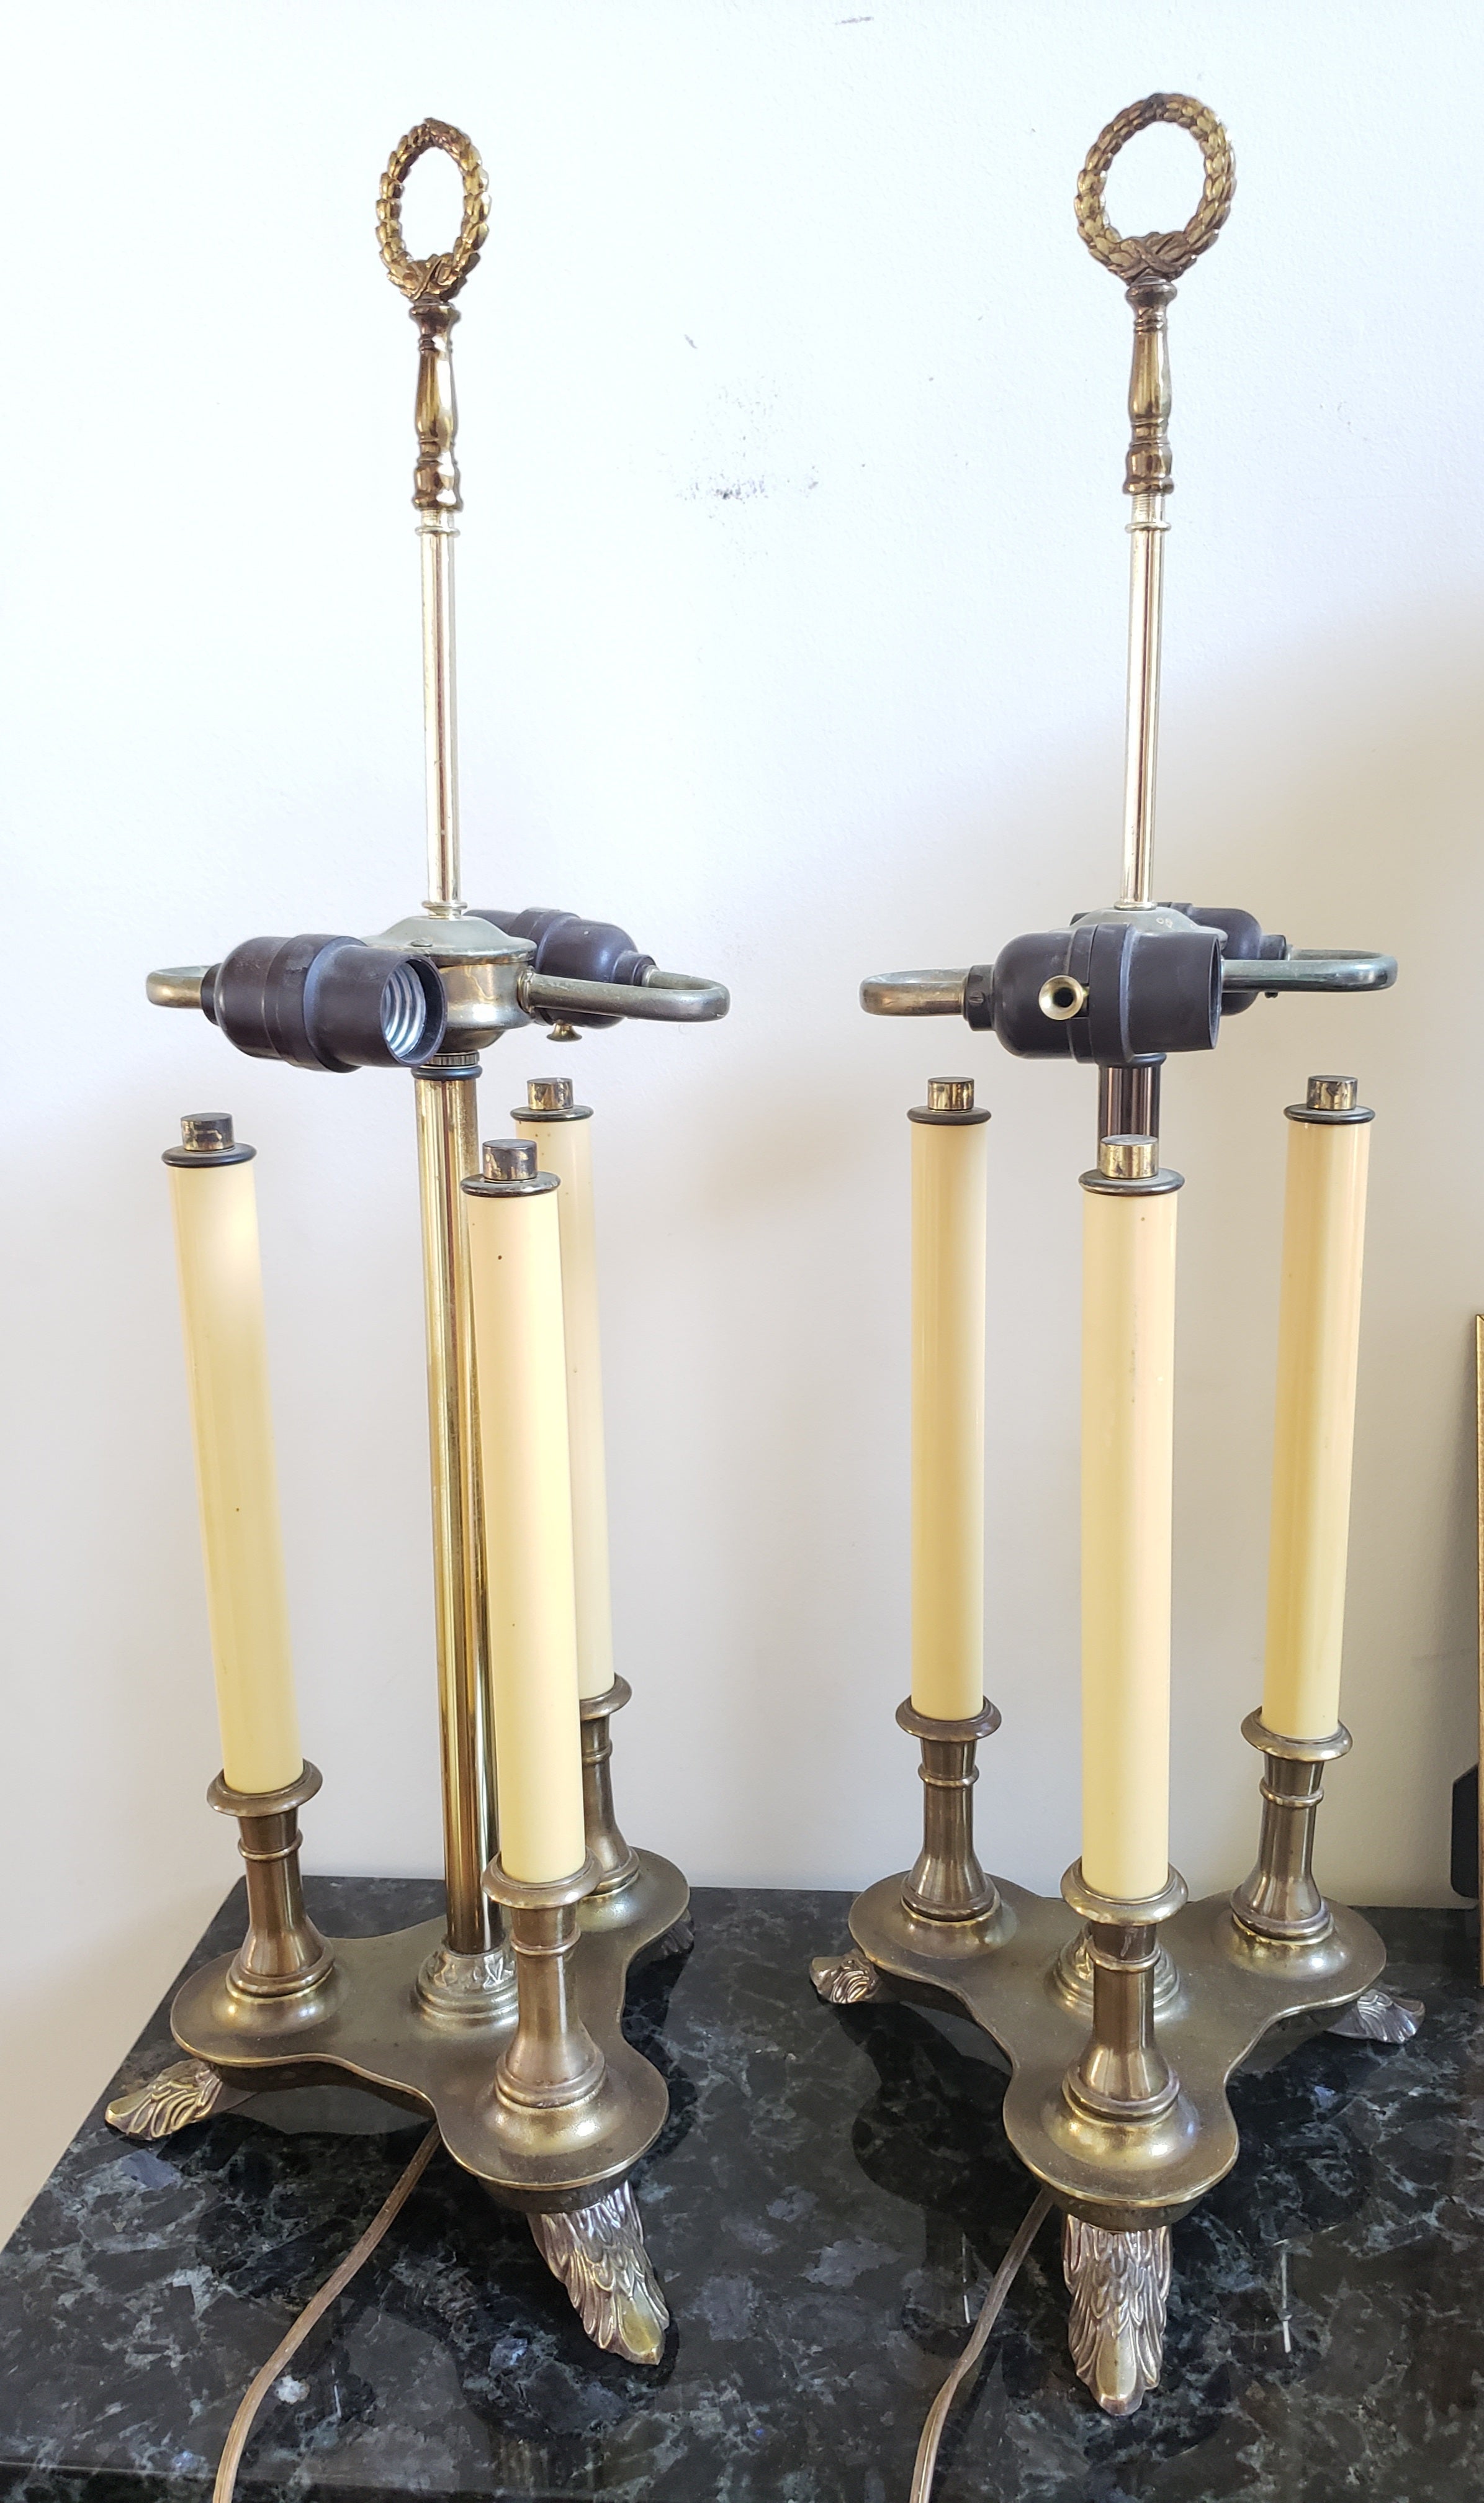 Beautiful pair Beaux Arts Style Patinated Metal Two-Light Bouillotte table Lamps. 
Very good vintage condition. Measure 9 inches in width x 9 inches in depth at the base and stand 25.25 inches tall at the top of the finial. Lamp shades are optional.